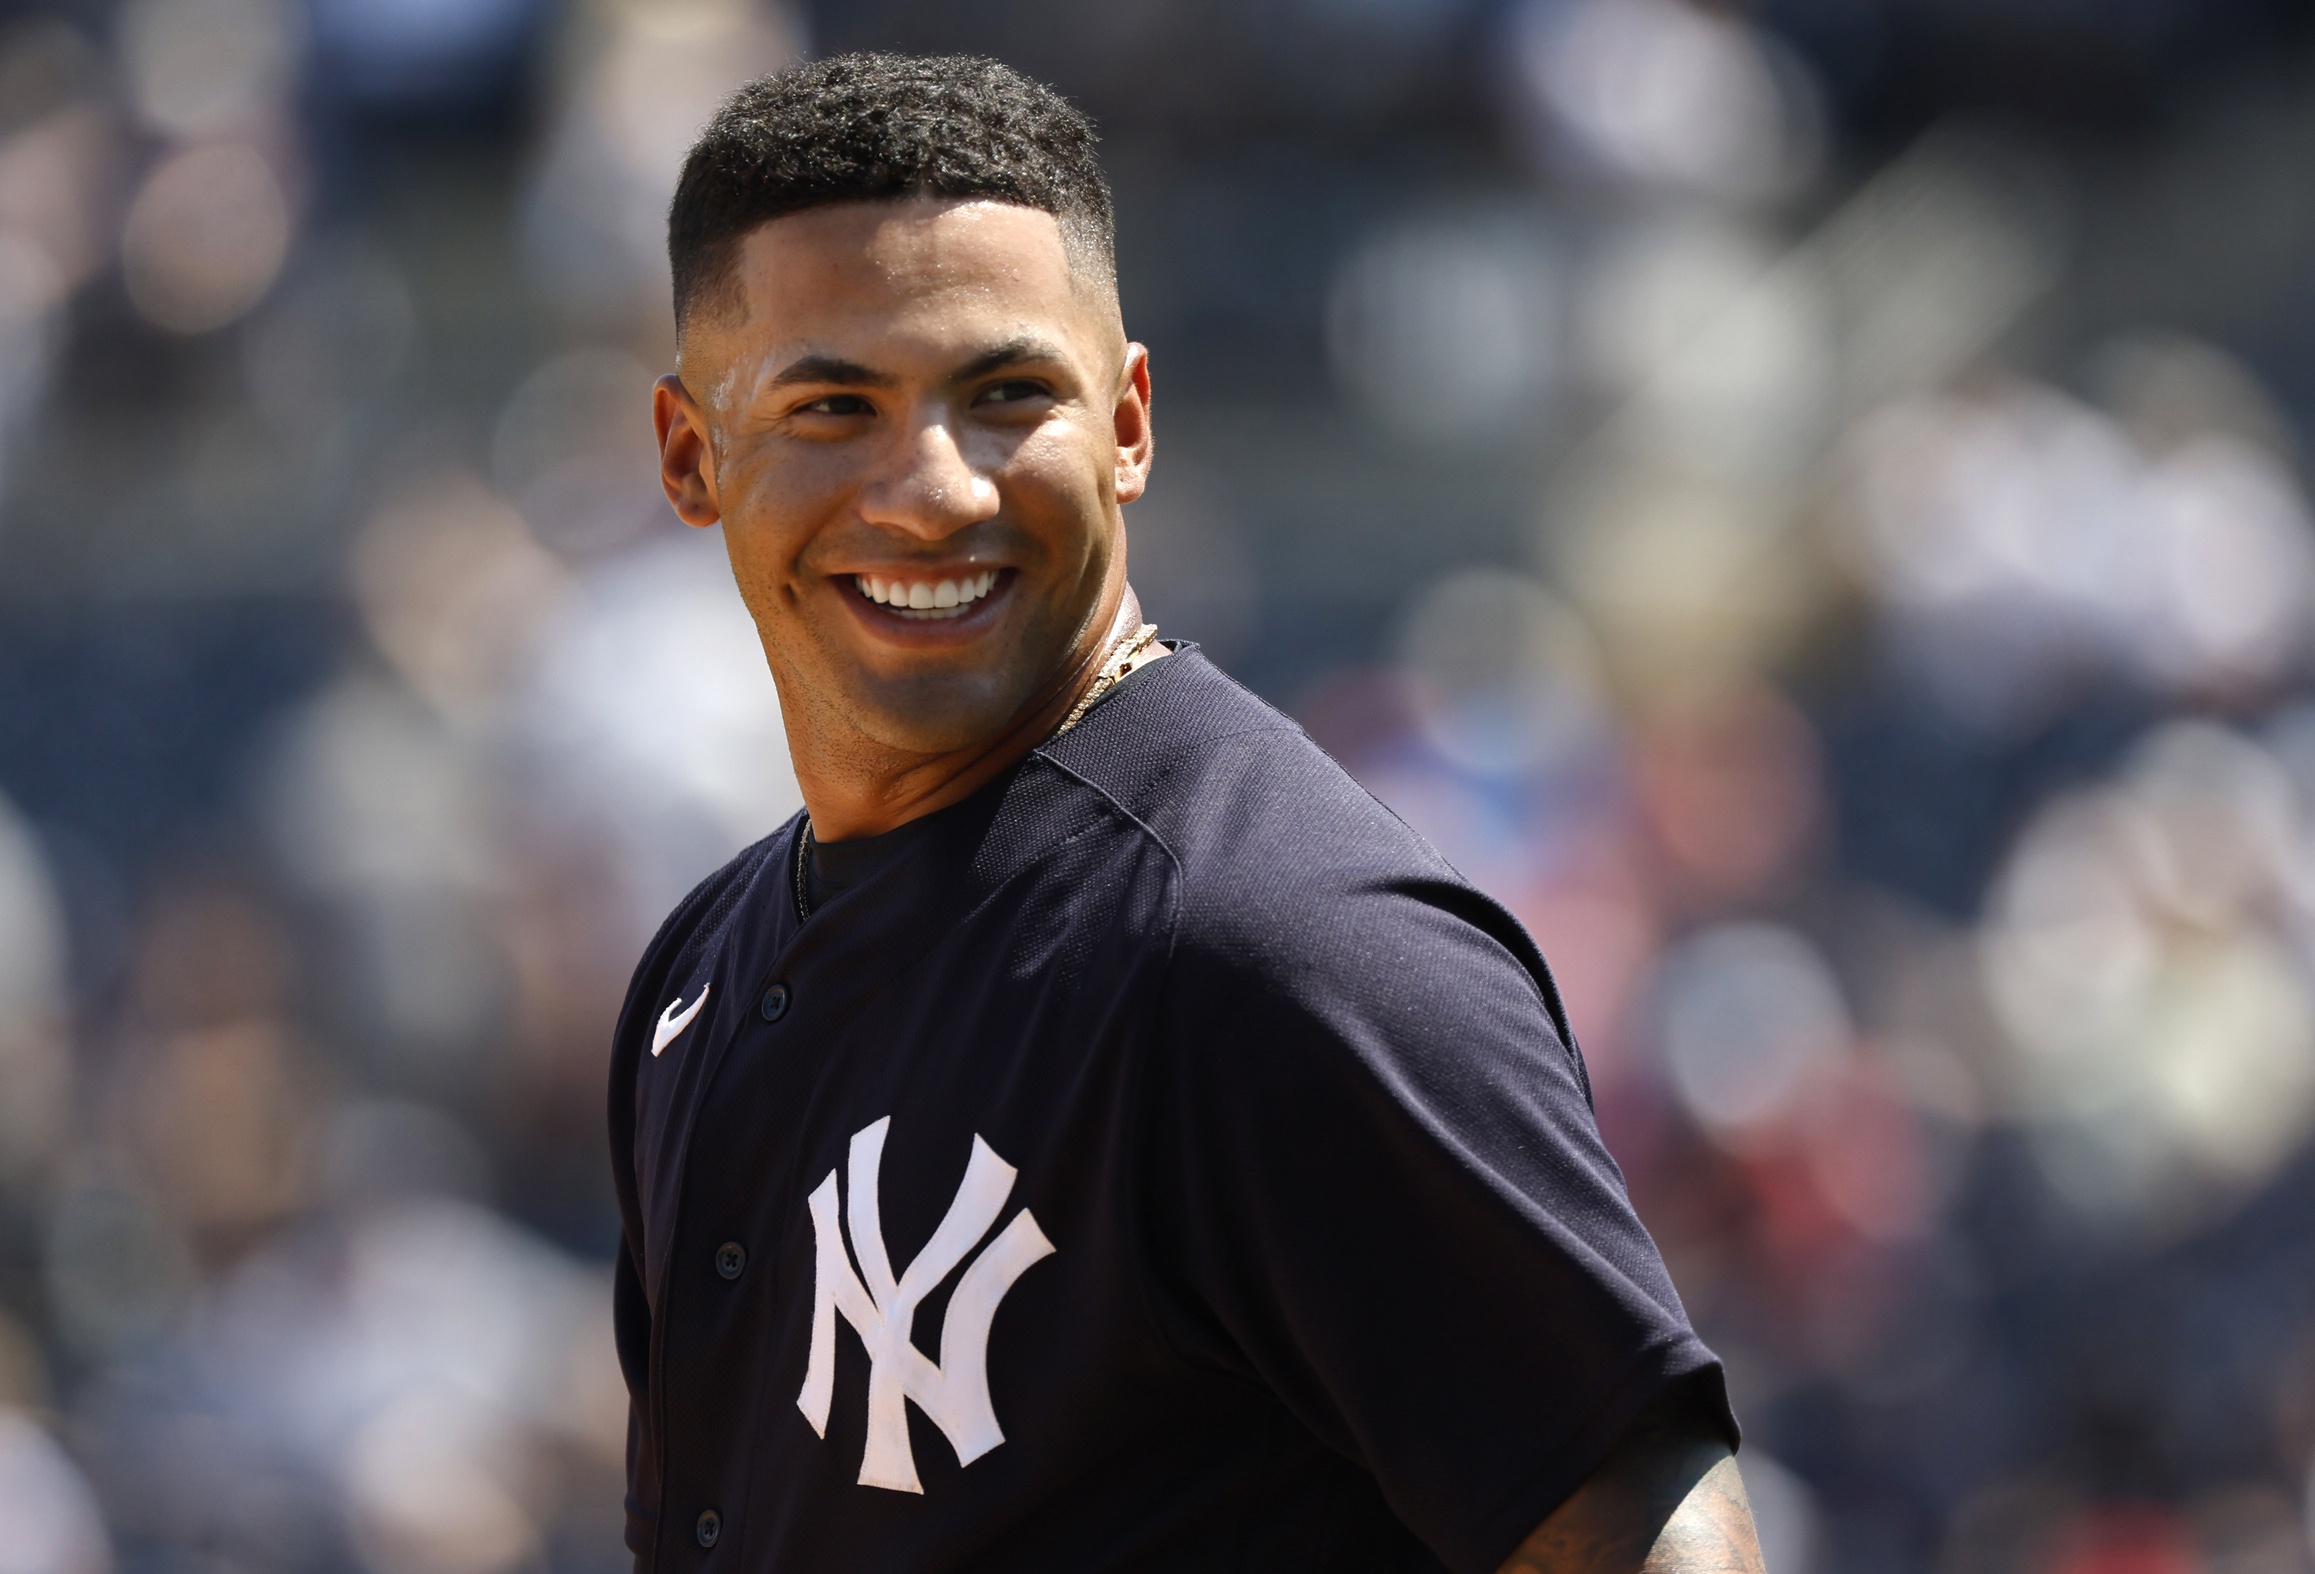 Yankees lineup has Joey Gallo and Gleyber Torres on bench